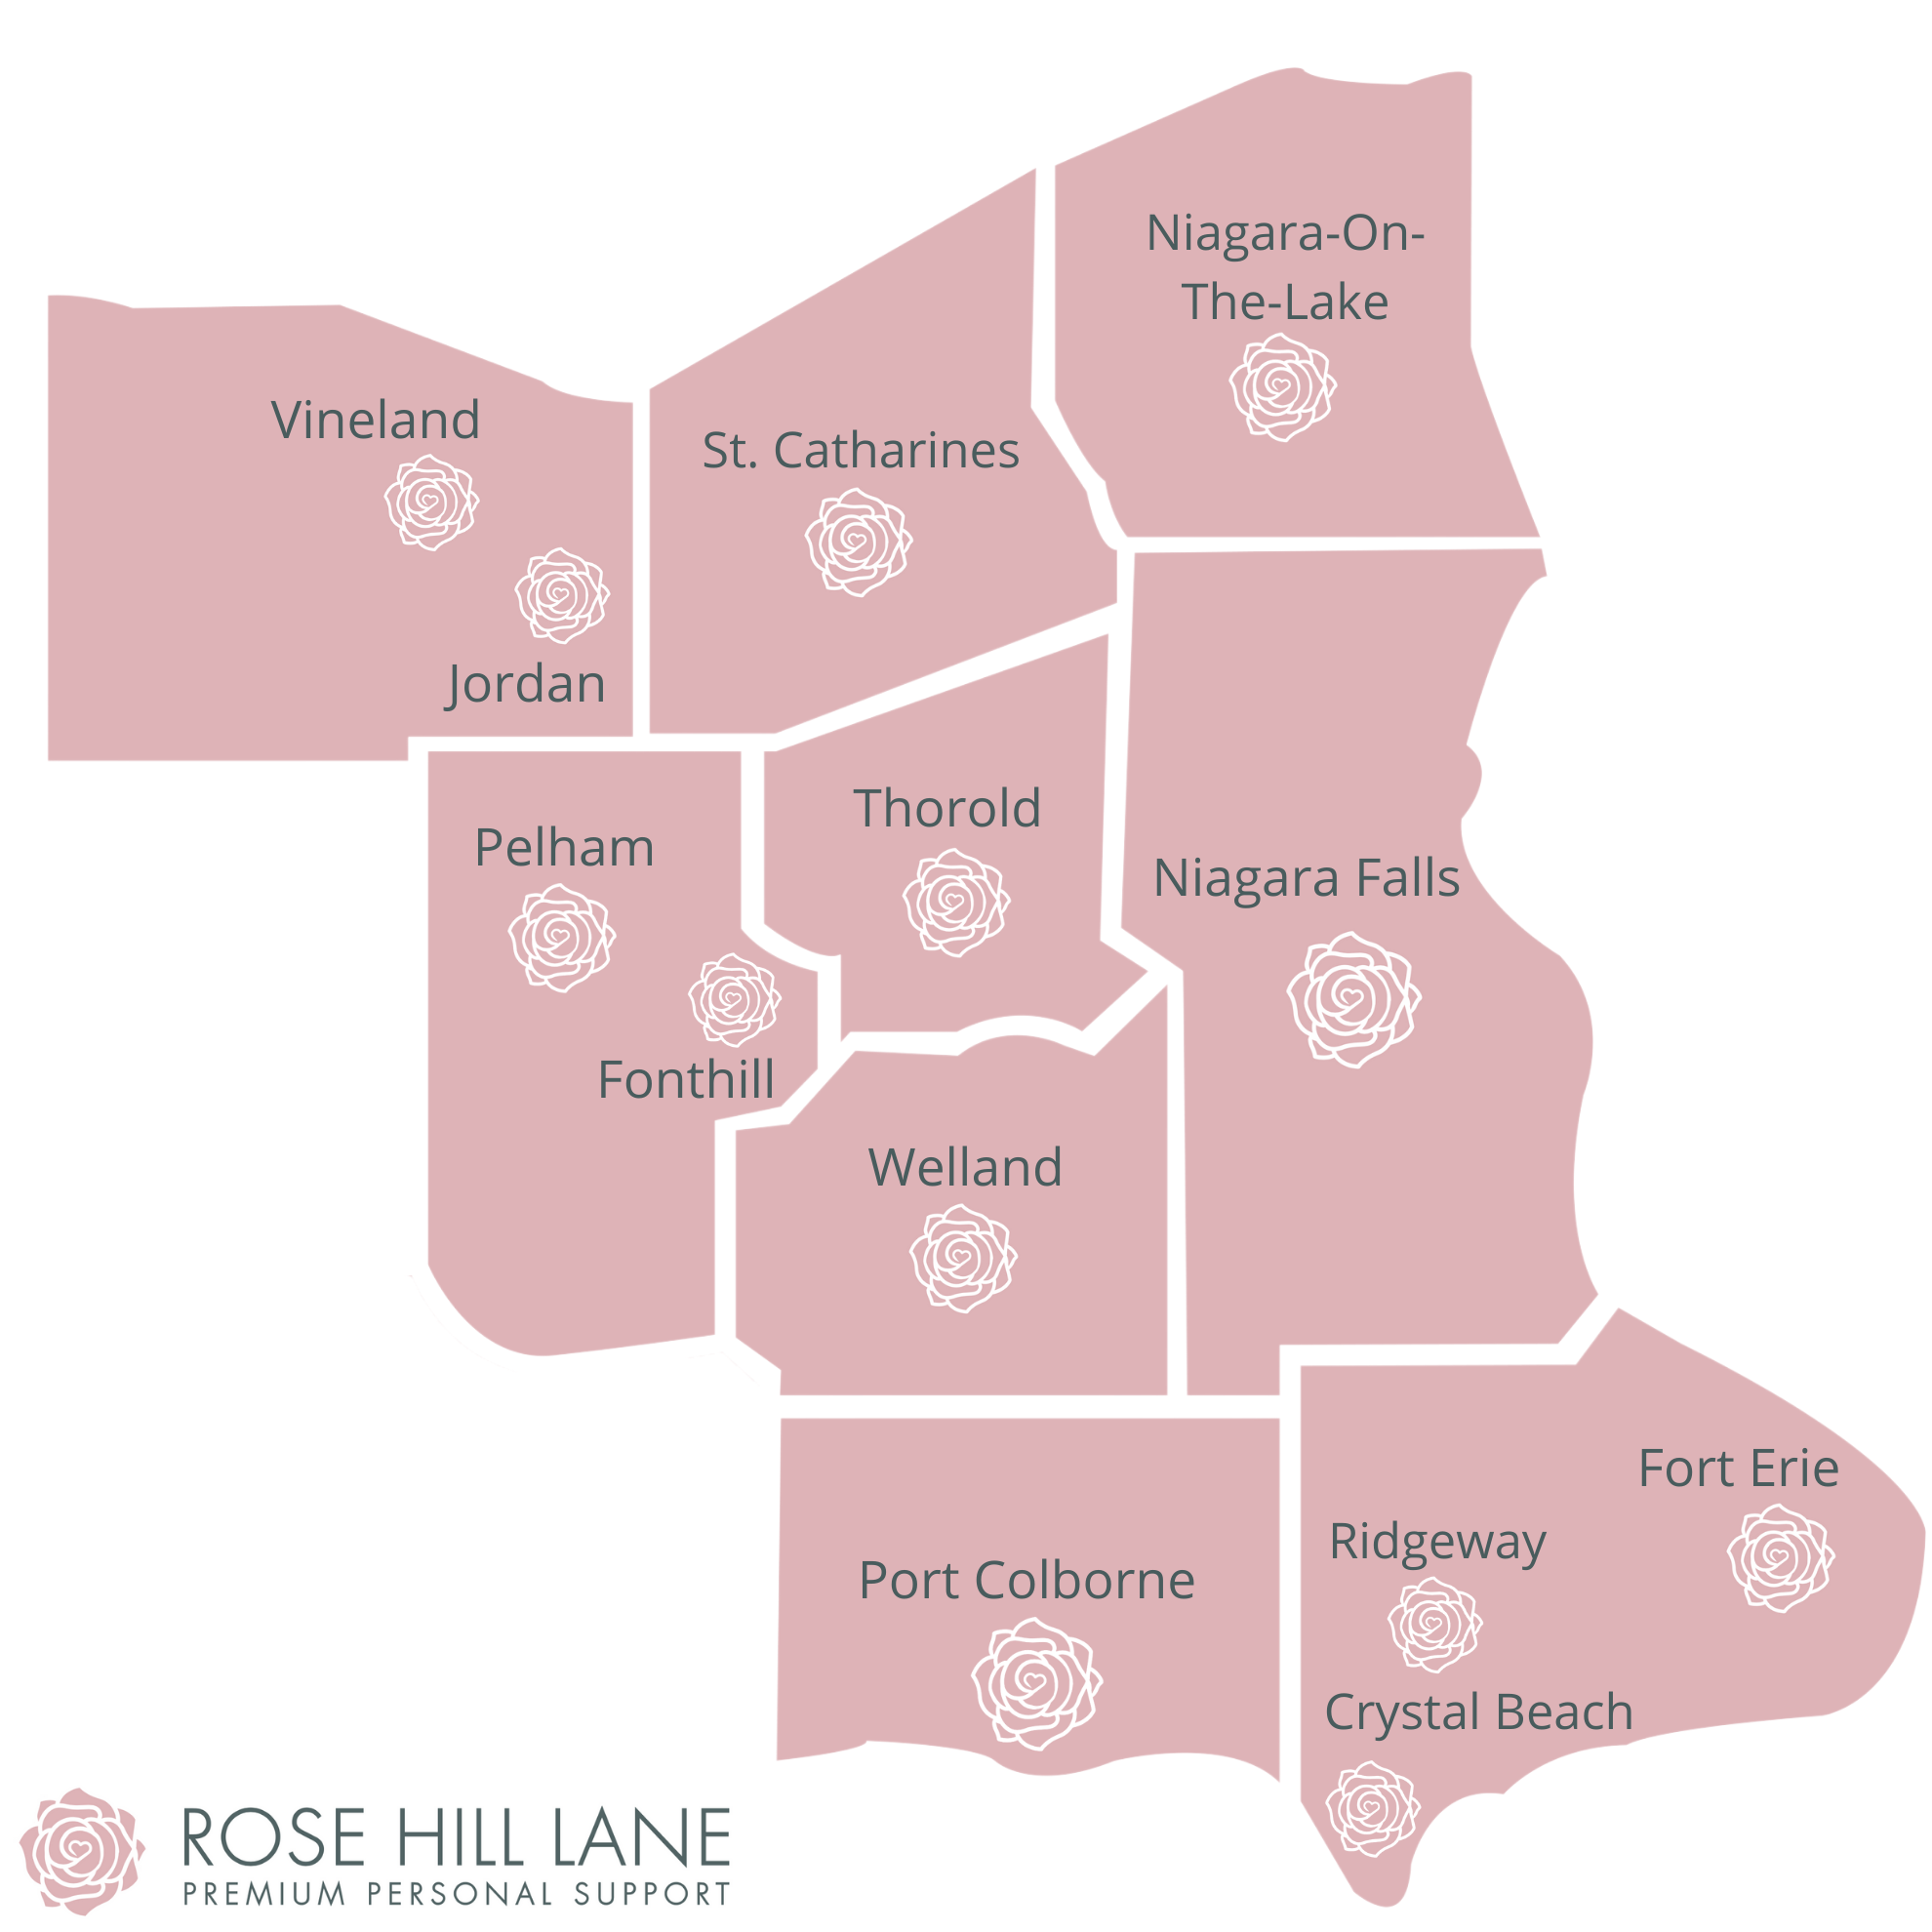 Rose Hill Lane Service Areas